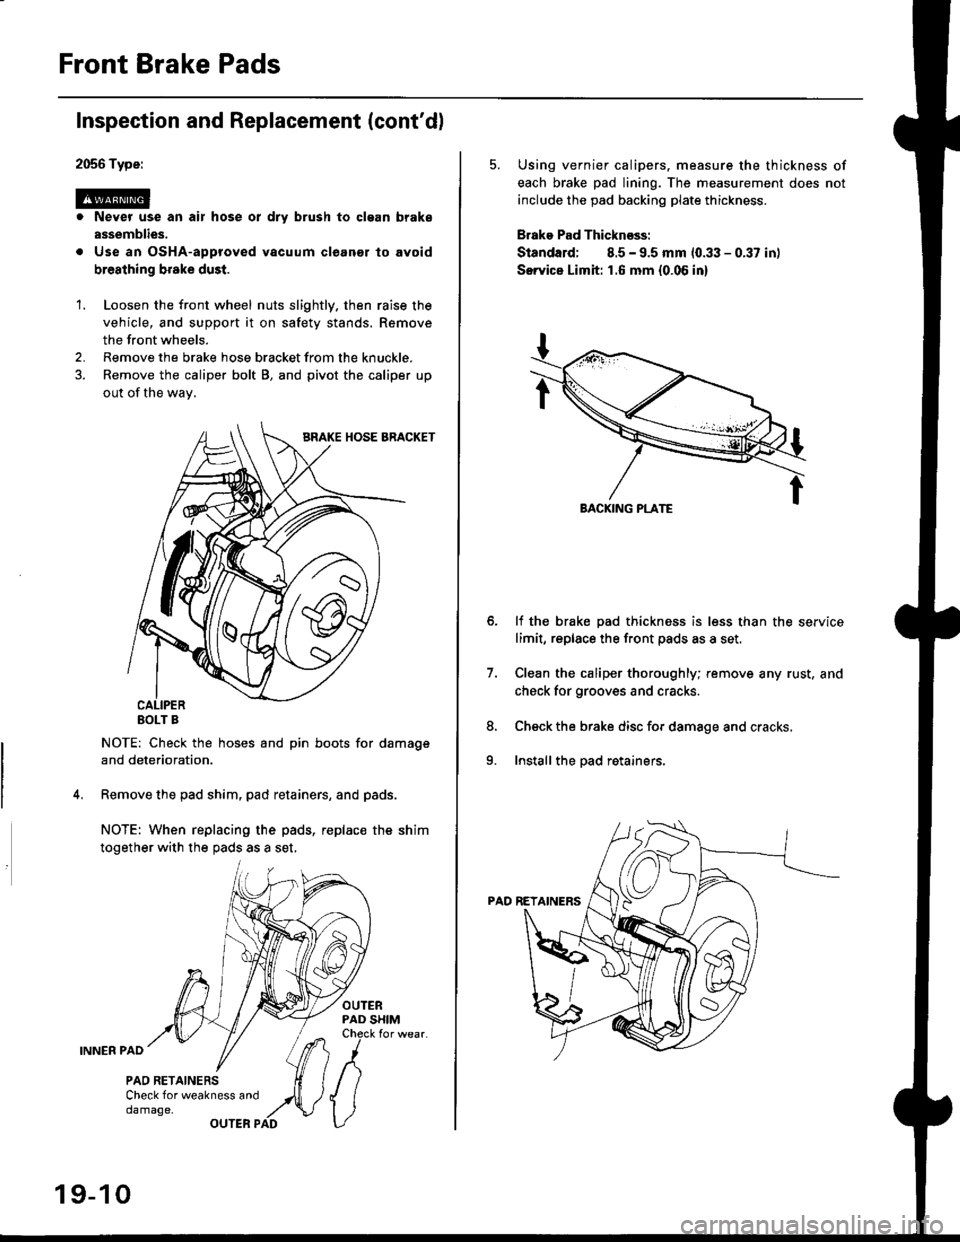 HONDA CIVIC 1996 6.G Workshop Manual Front Brake Pads
2056 Type:
@. Never use an air hose or dry brush to clgan brake
assemblies.
. Use an OsHA-approved vacuum cleanor lo avoid
breathing broke dust.
Inspection and Replacement (contdl
1.